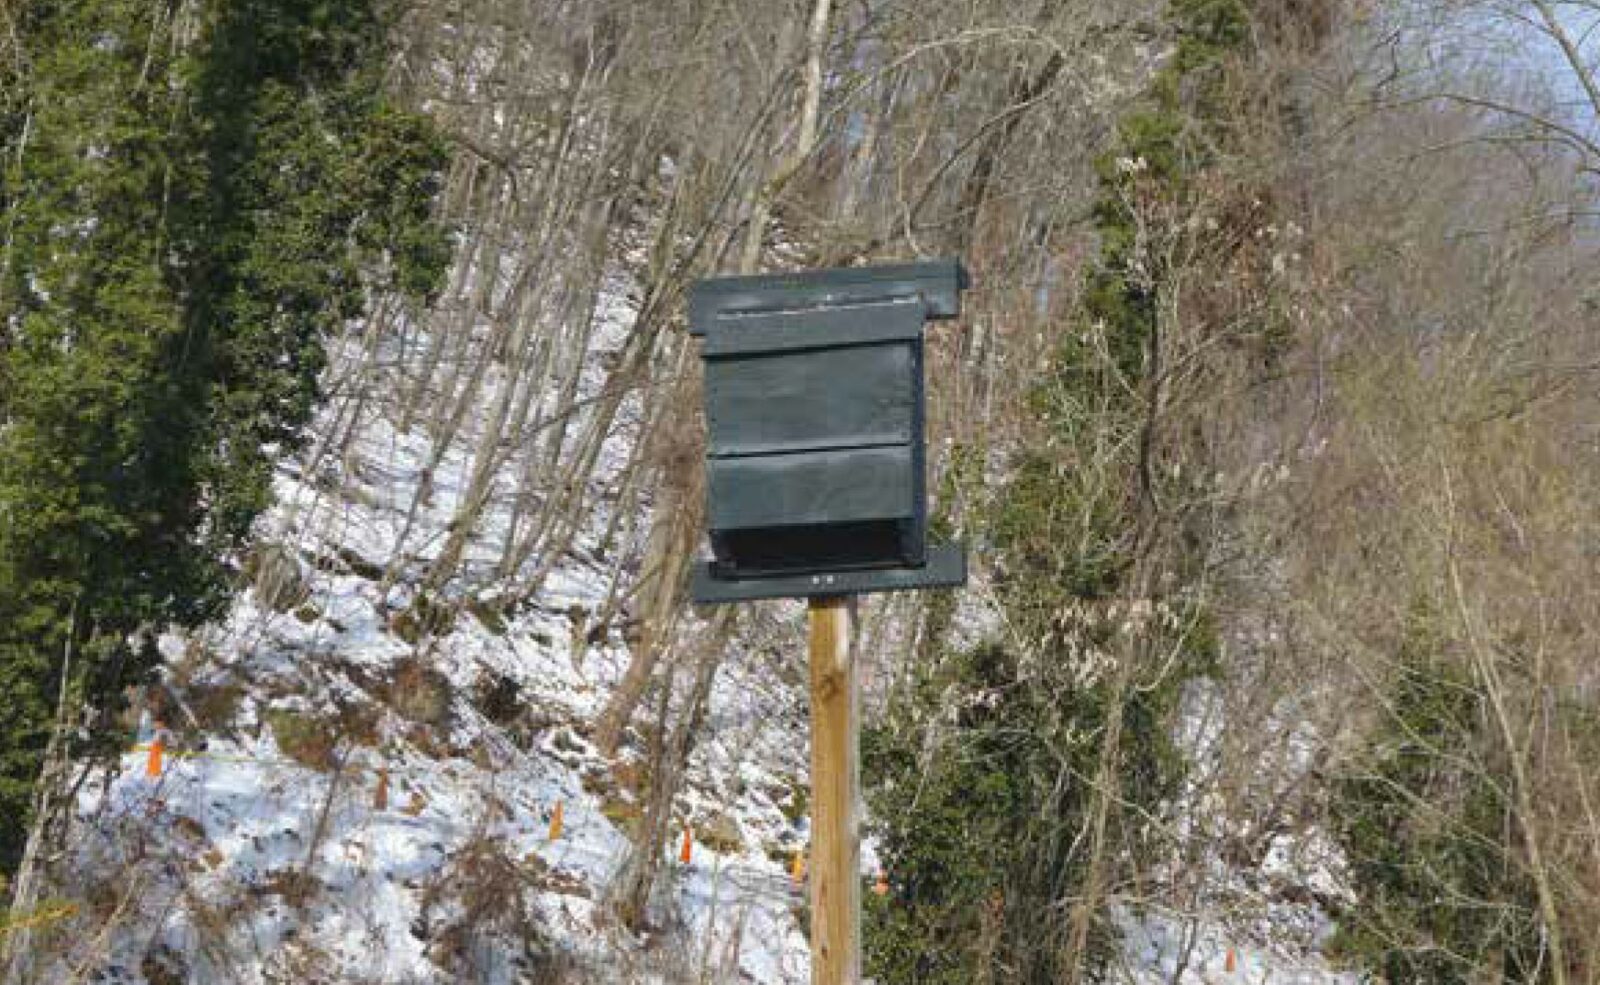 An image of a small black bat box upon a pole near a mountain, this box can house up to 100 bats despite it's minimal size.